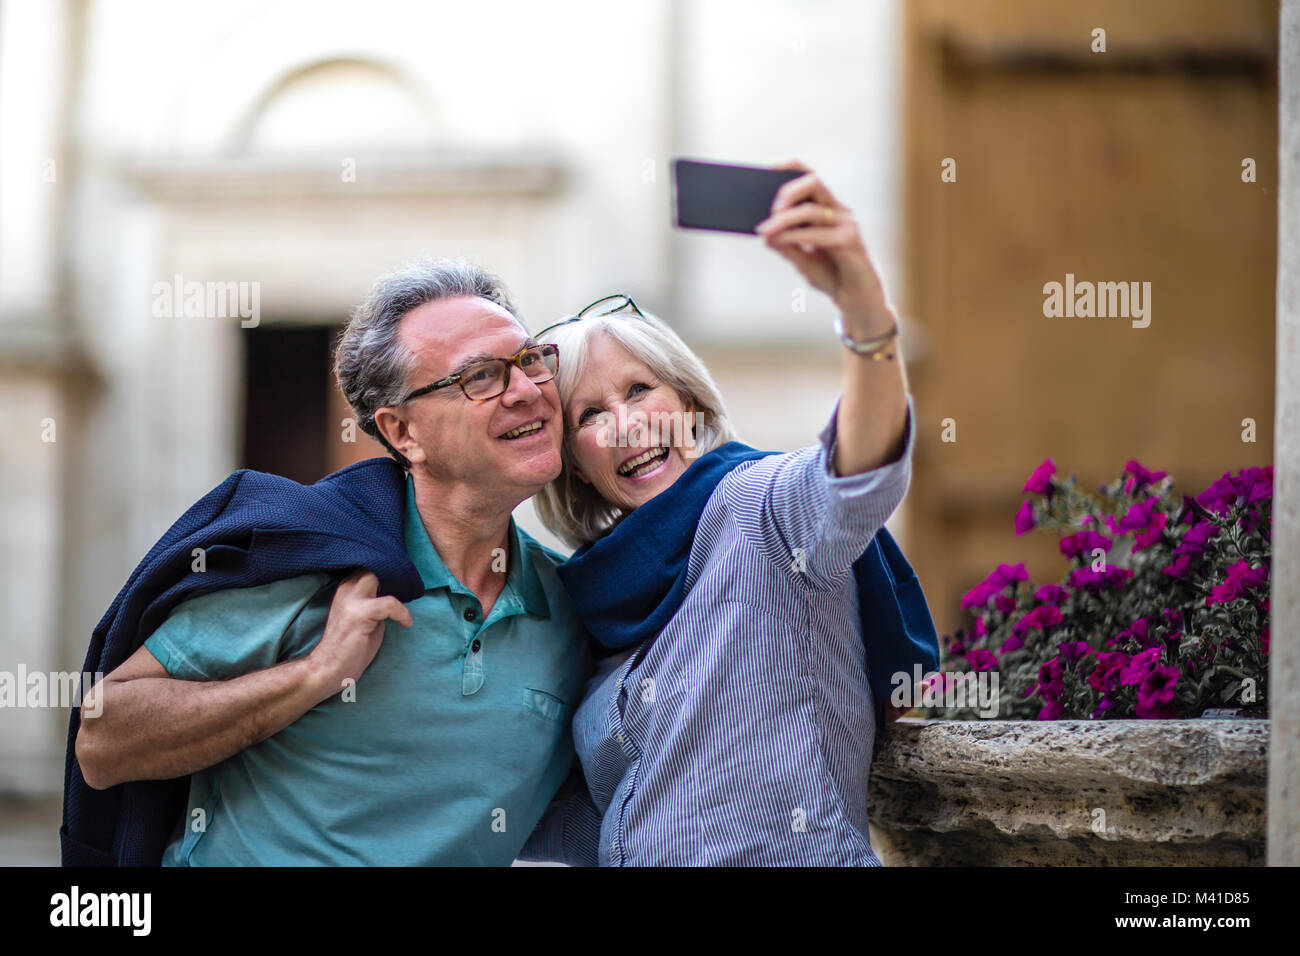 Senior couple on vacation taking a photo at a tourist site Stock Photo